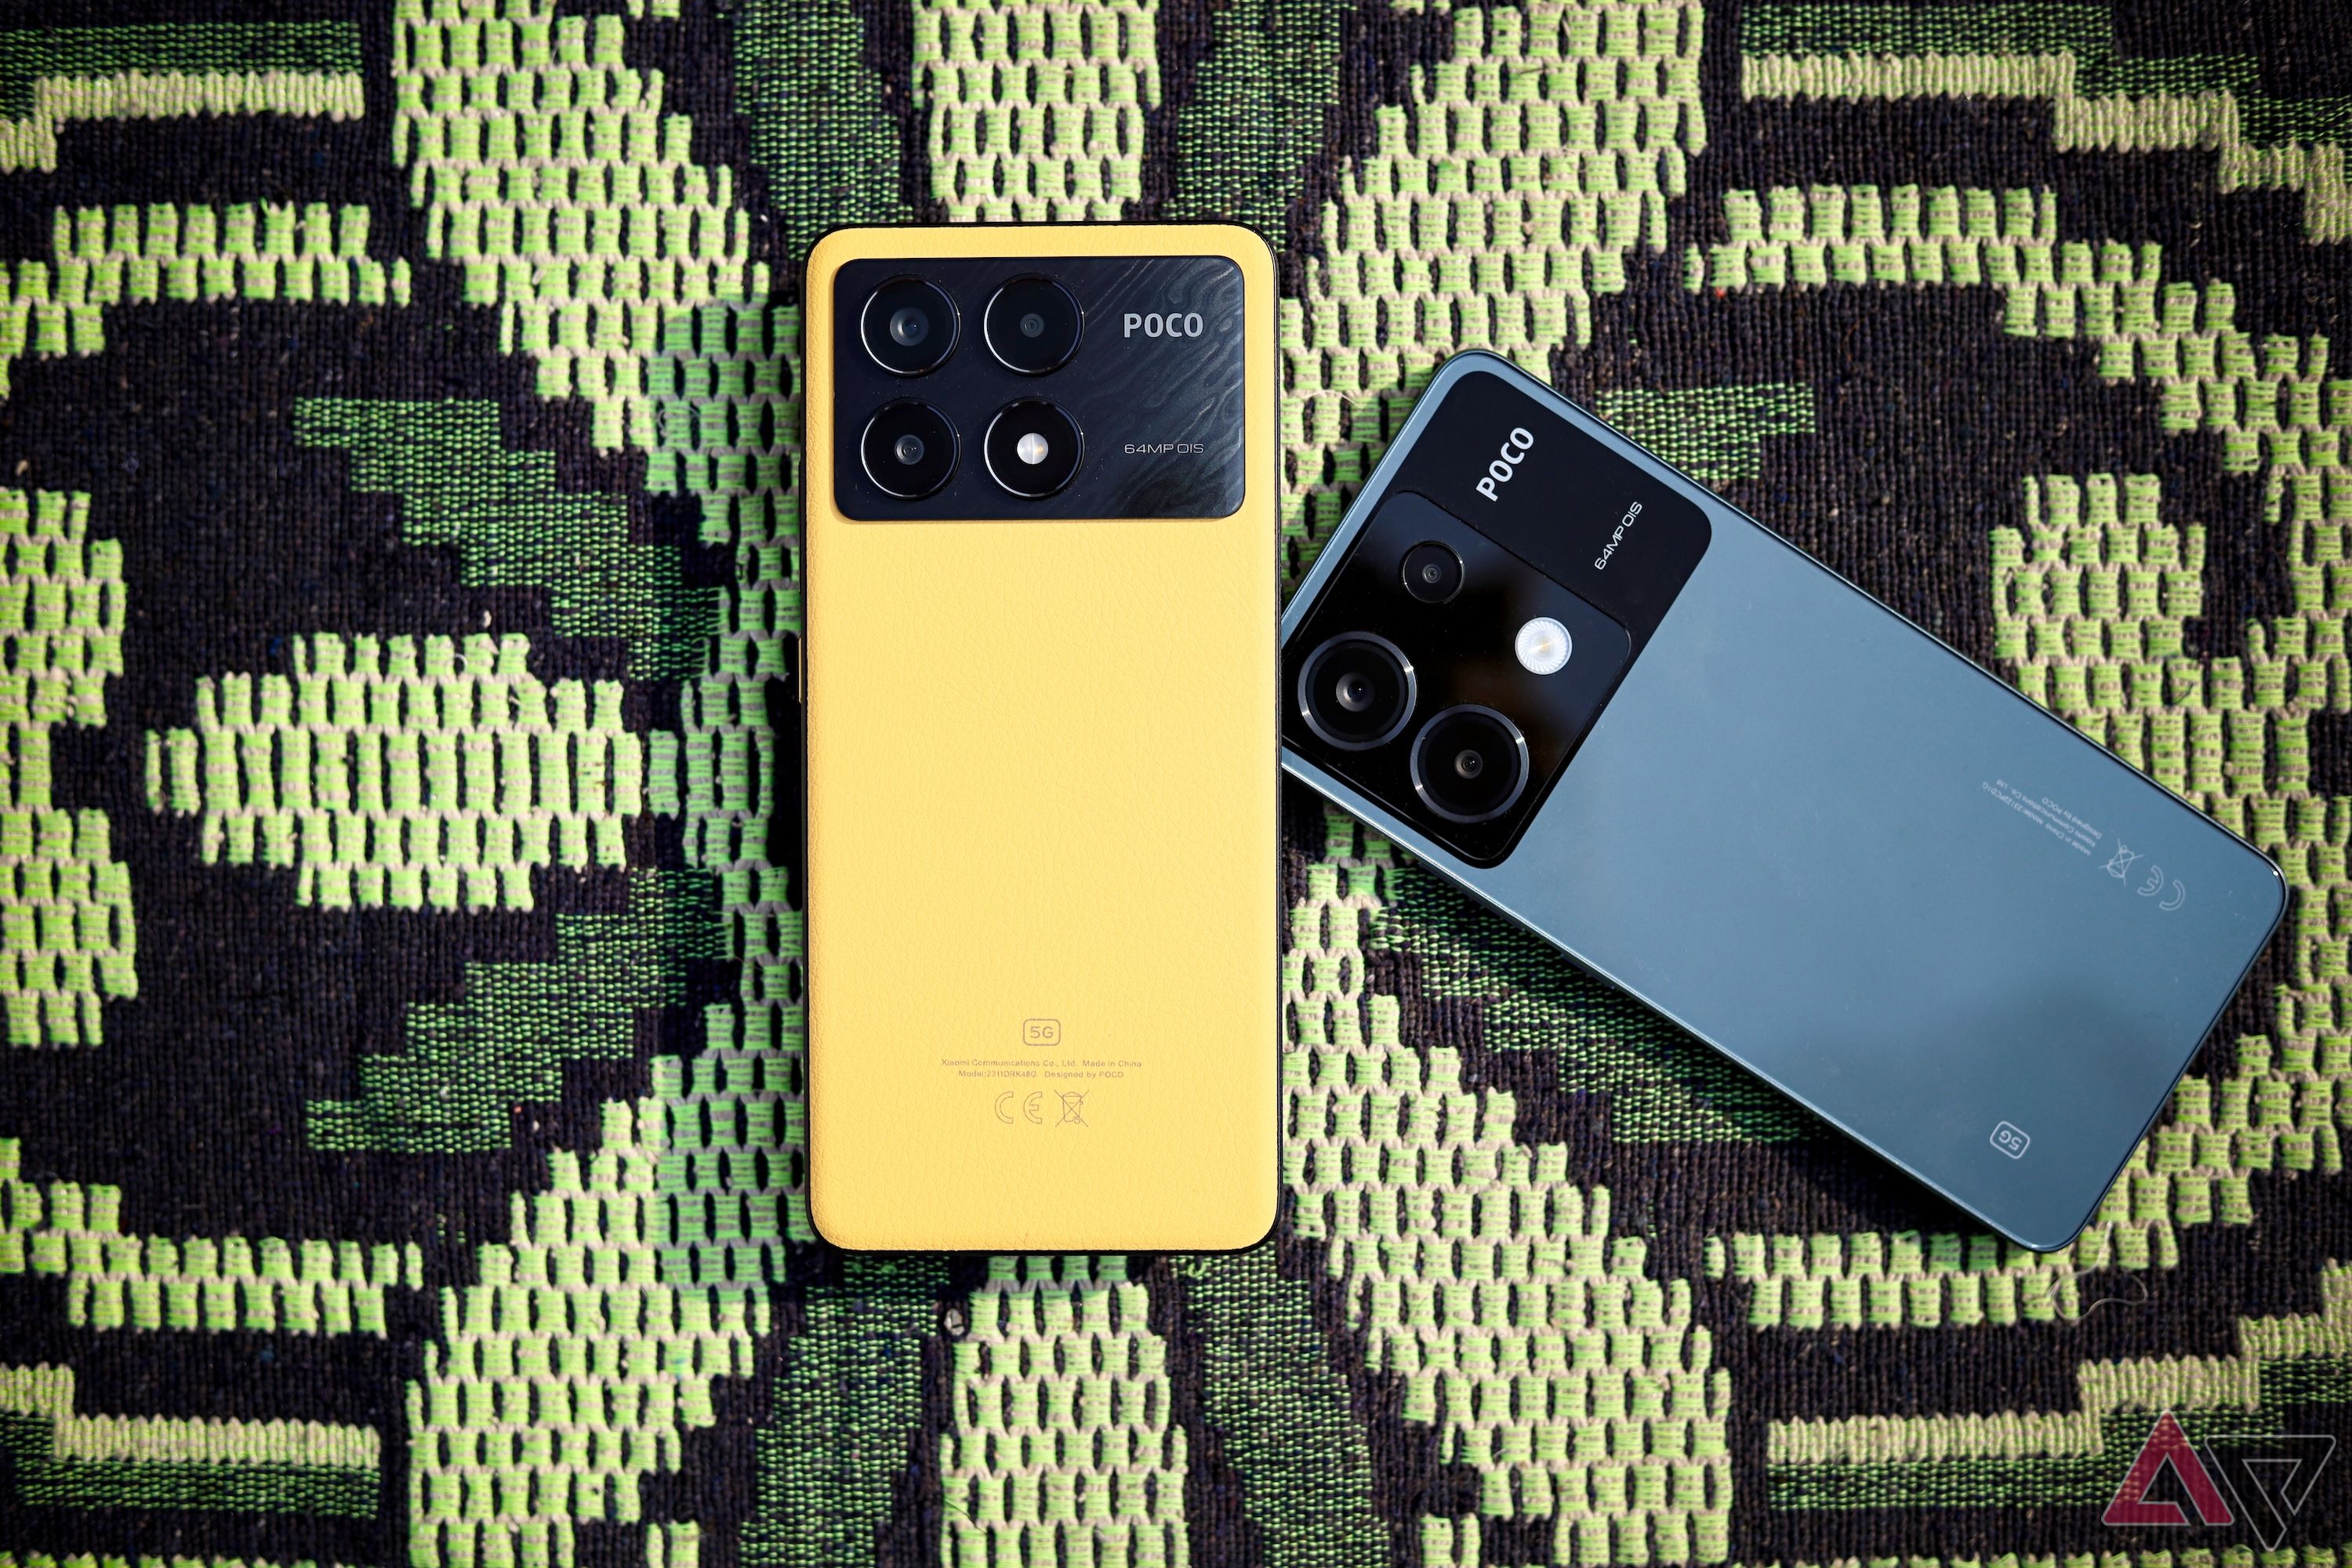 POCO X3 GT is a rebranded Redmi Note 10 Pro 5G with a minor design update